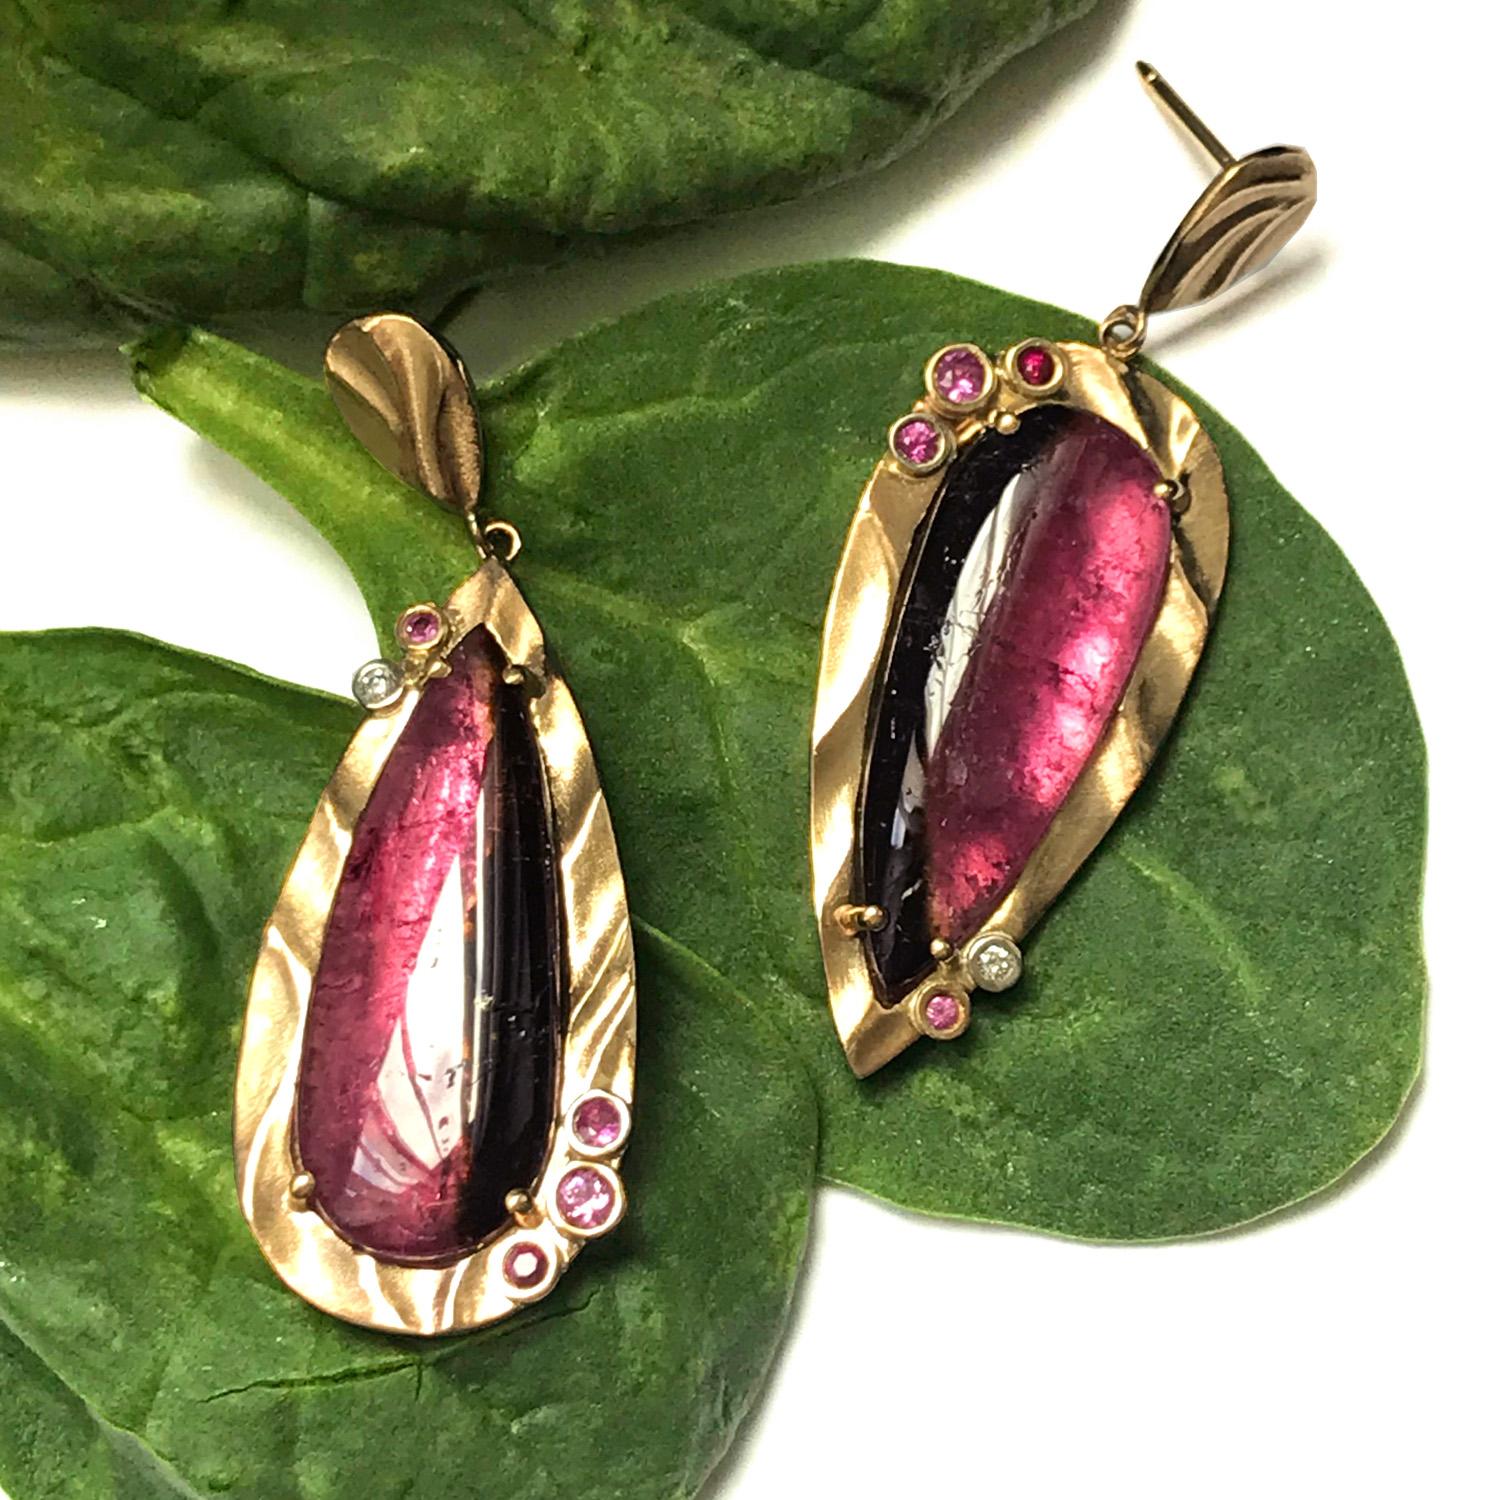 These mysterious Pink Mystique Earrings, which are 34mm long and 16mm at their widest point, feature unusual Bi-Color Pink Tourmalines (17.20ct total weight) accented with 0.29ct Pink Sapphire, 0.08ct Rubies and 0.03ct Diamonds. The 14 karat yellow